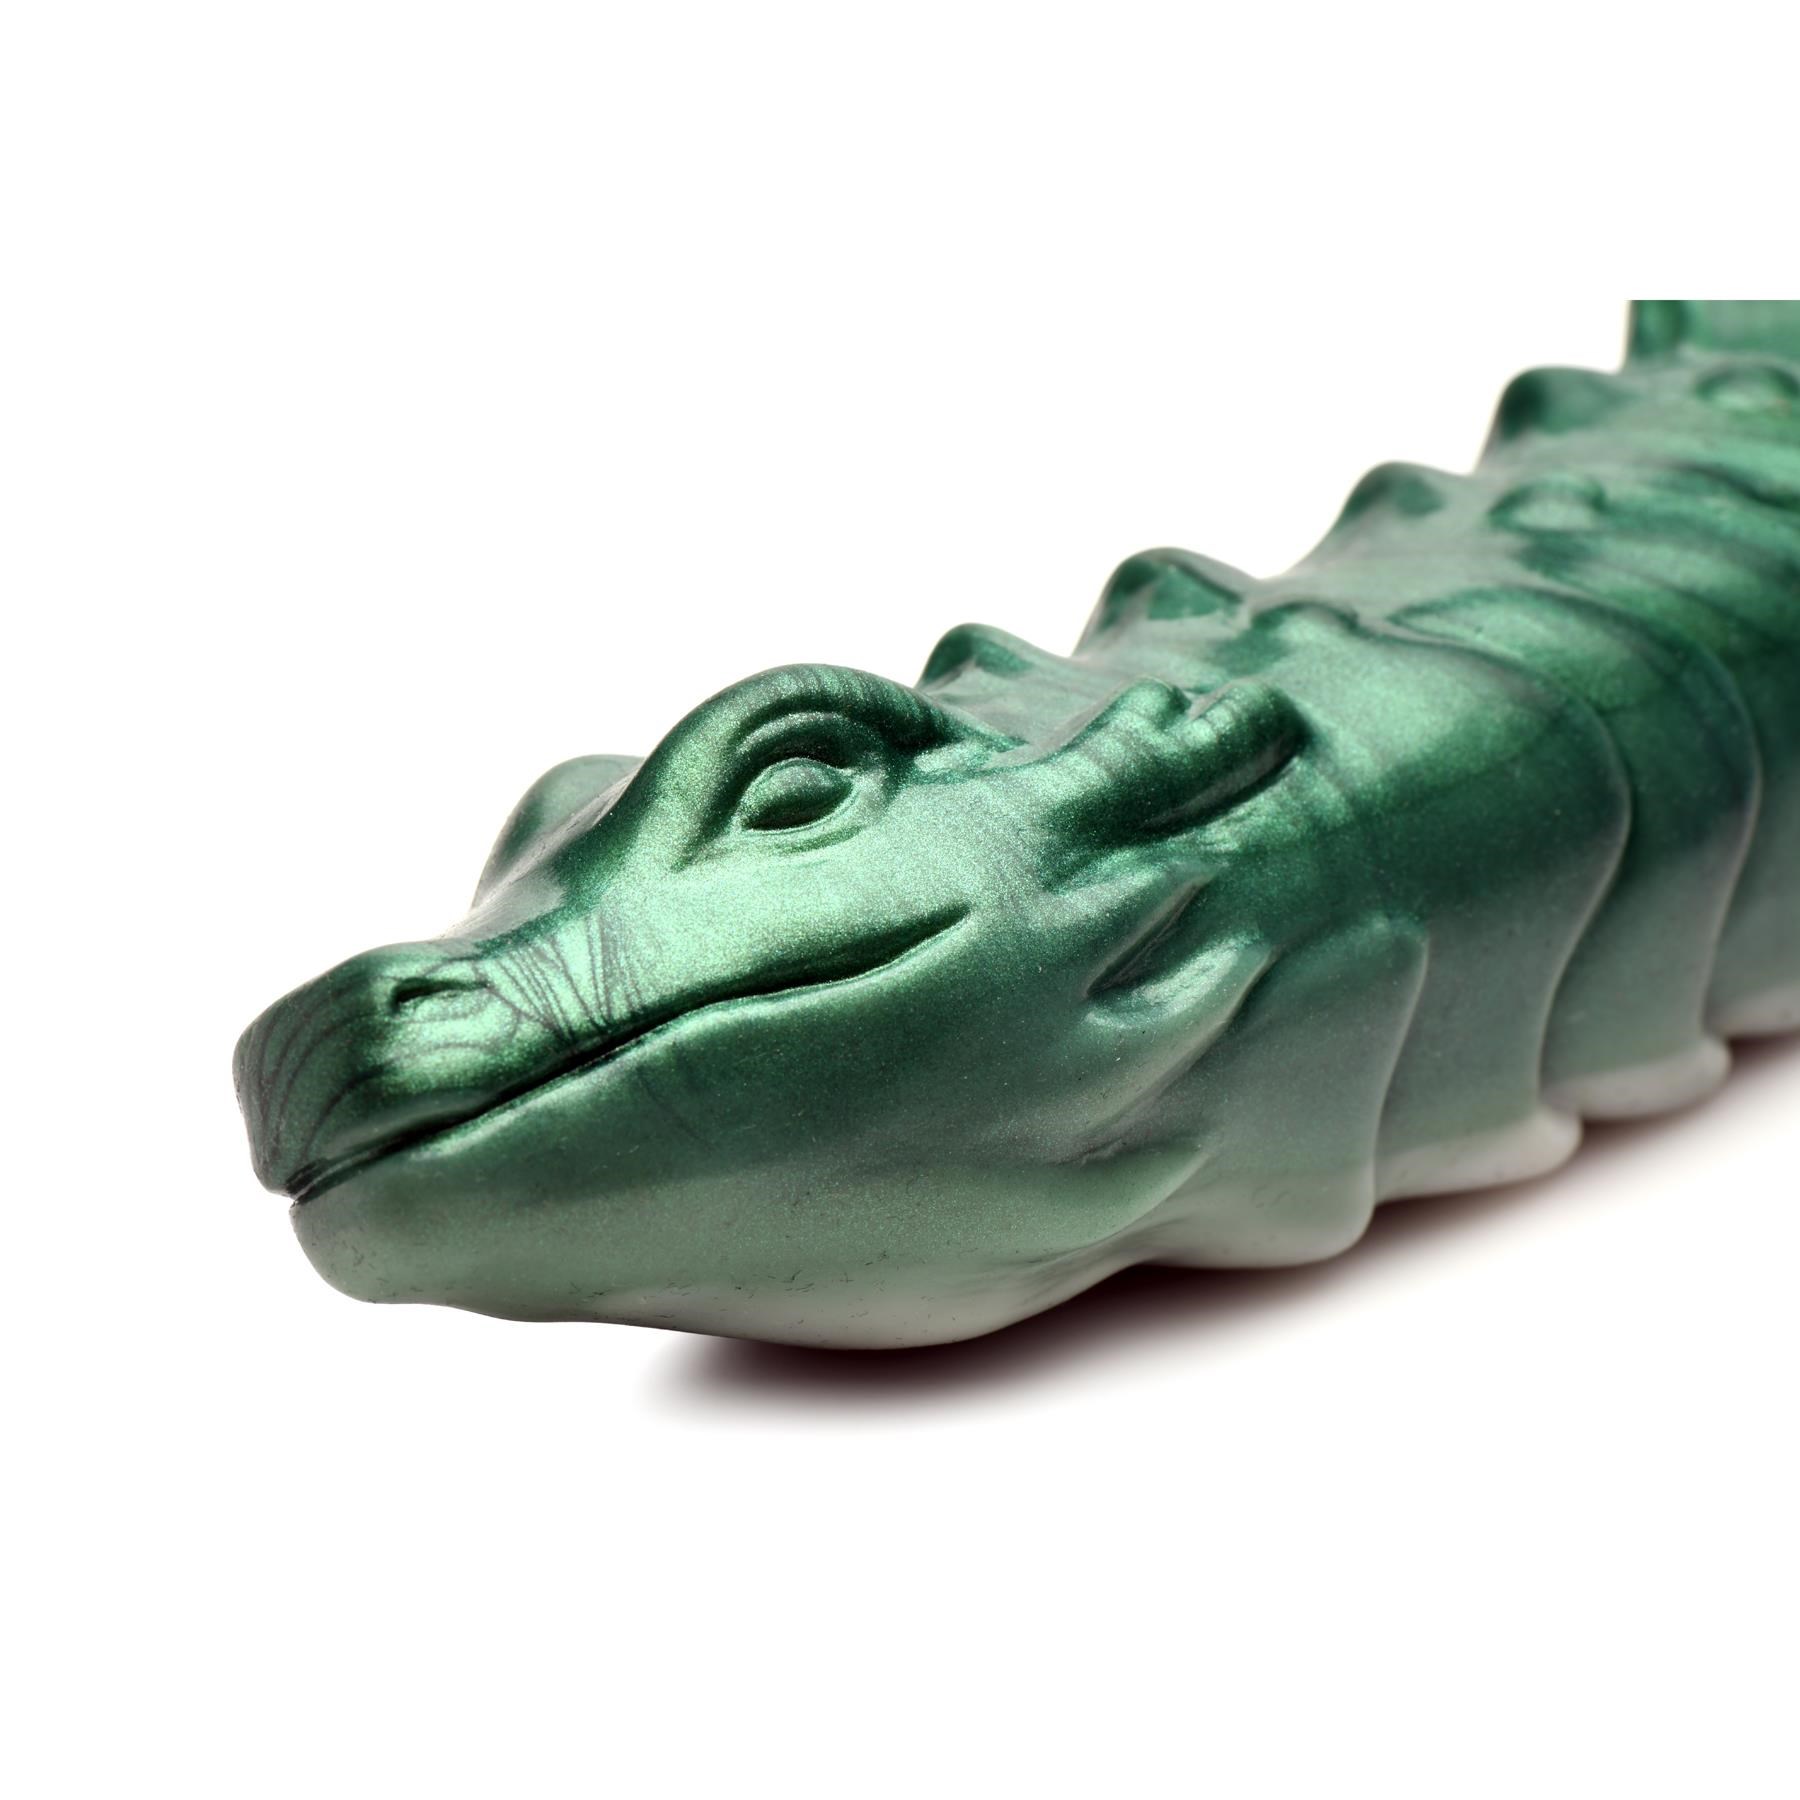 CreatureCocks Cockness Monster Silicone Dildo - Product Shot #9 - Close Up On Tip